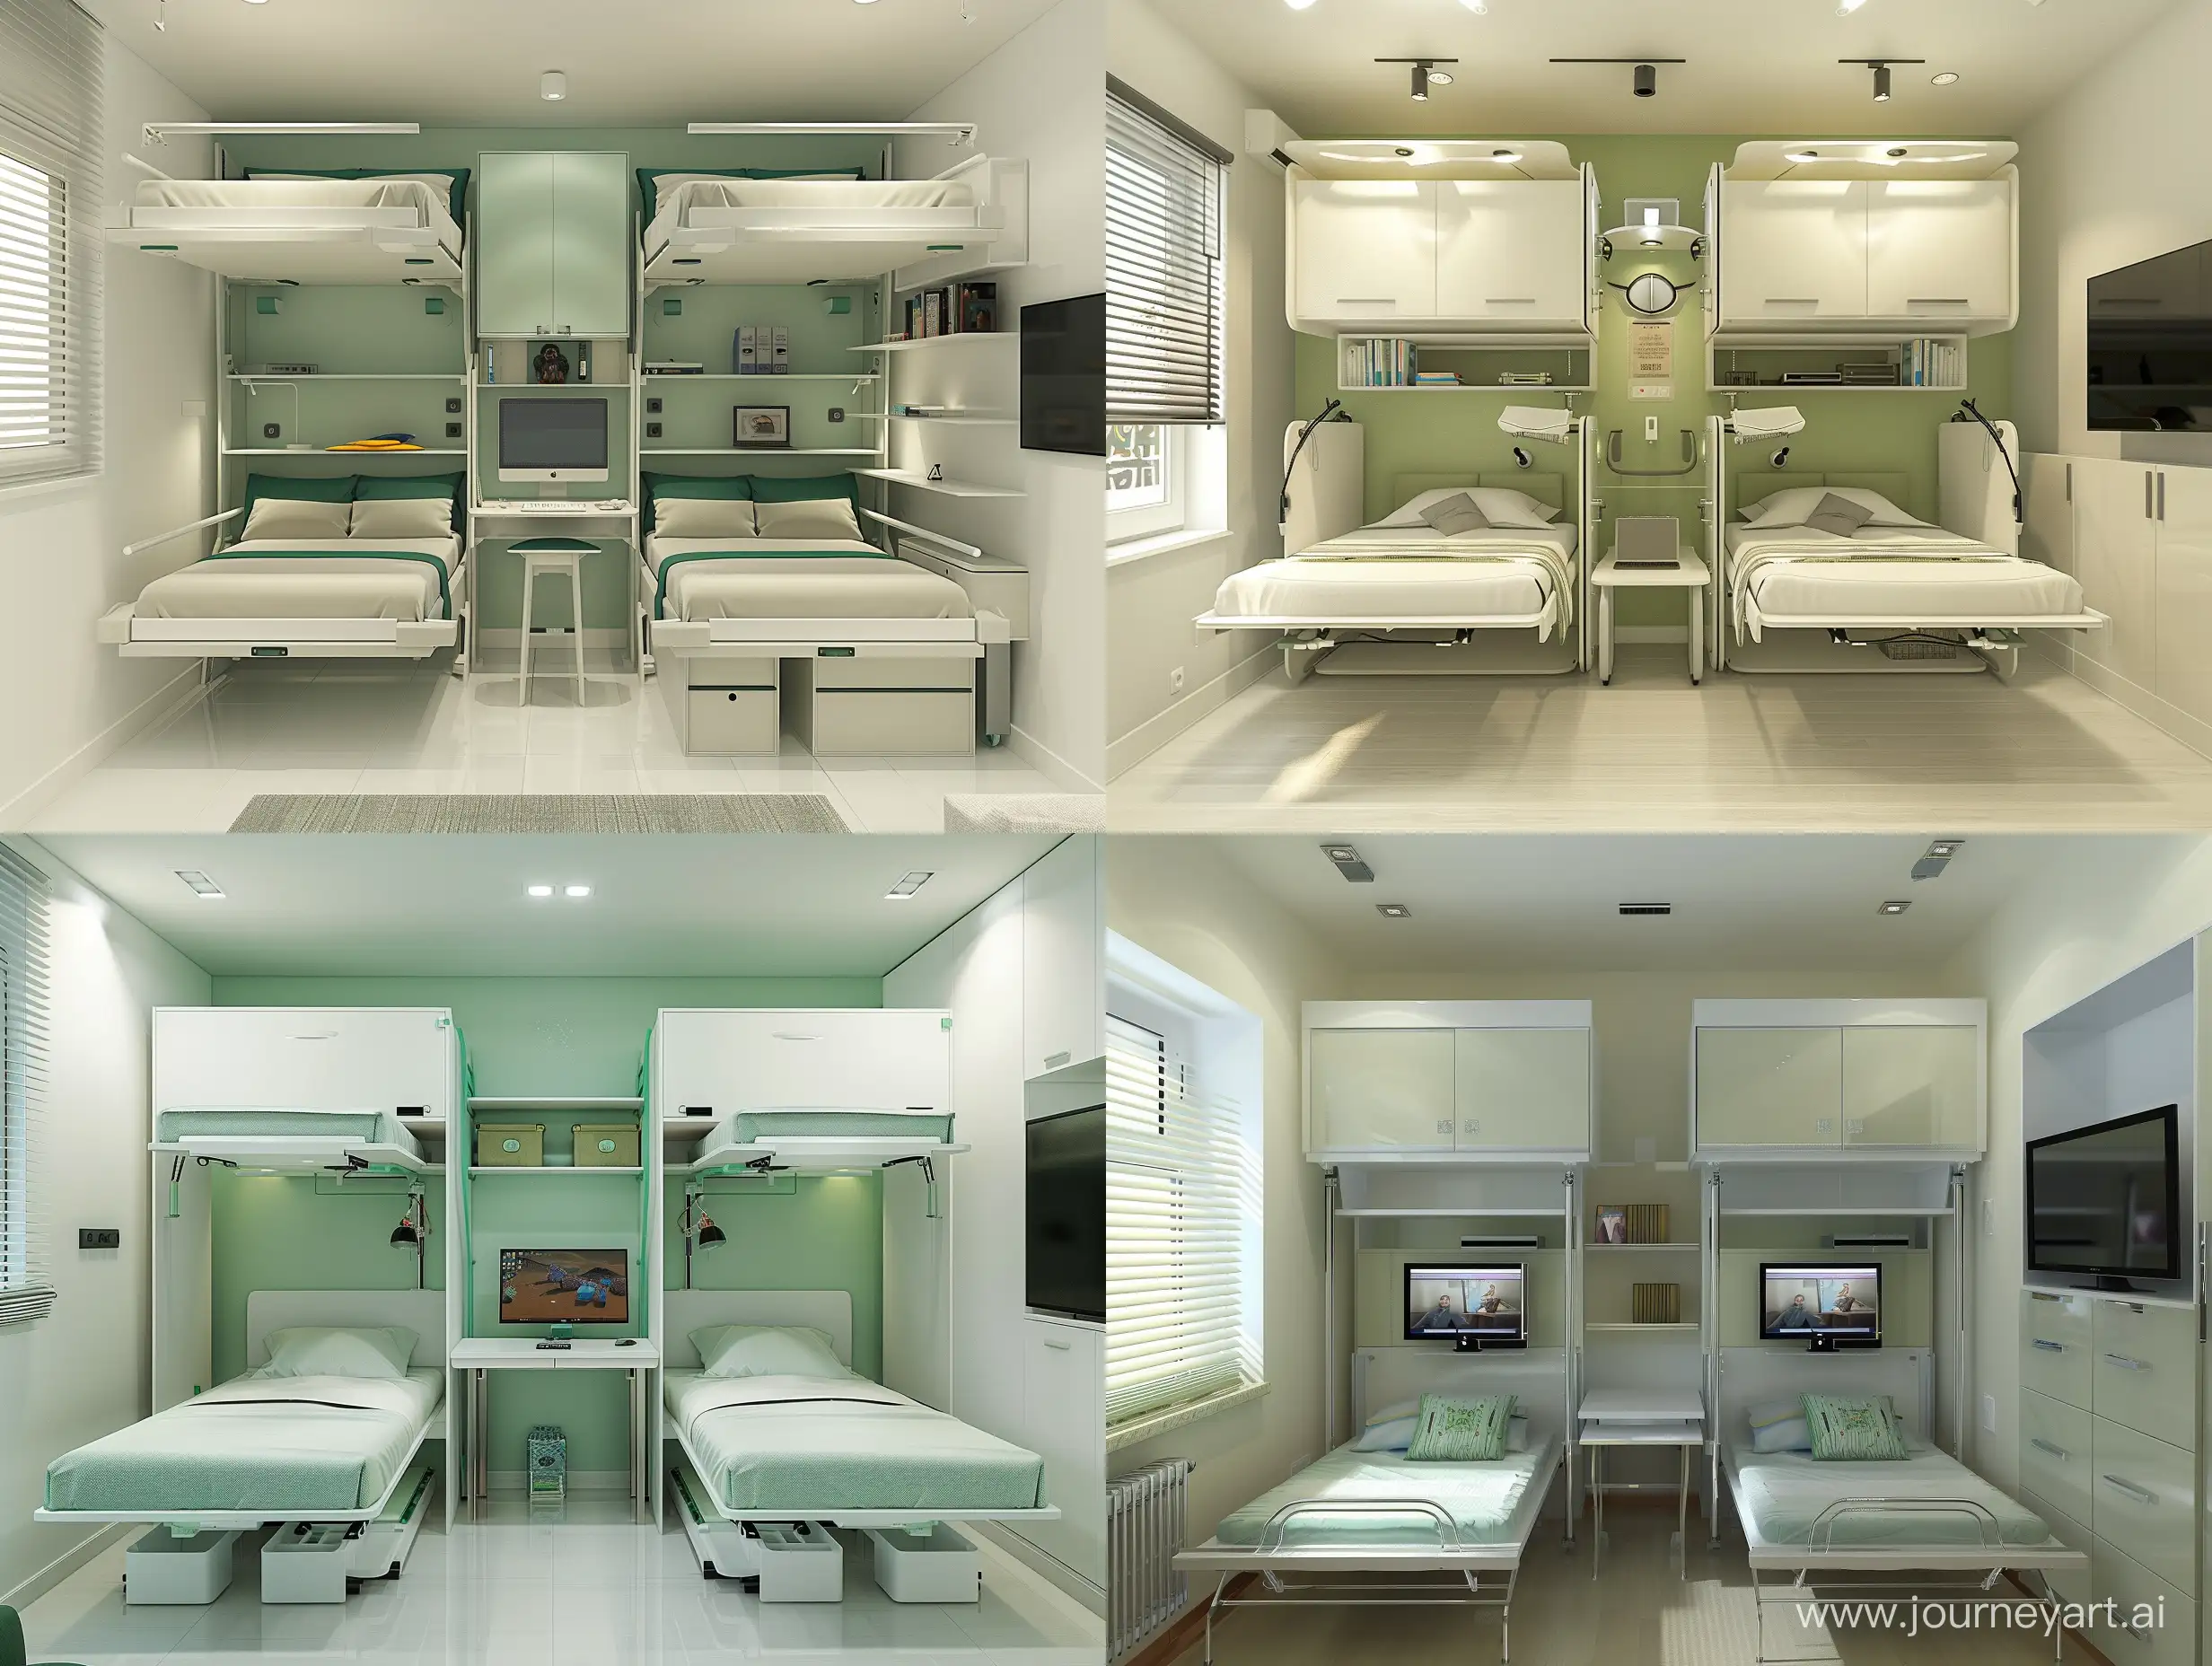 Modern-WhiteGreen-Style-Room-with-Wall-Beds-and-Workspaces